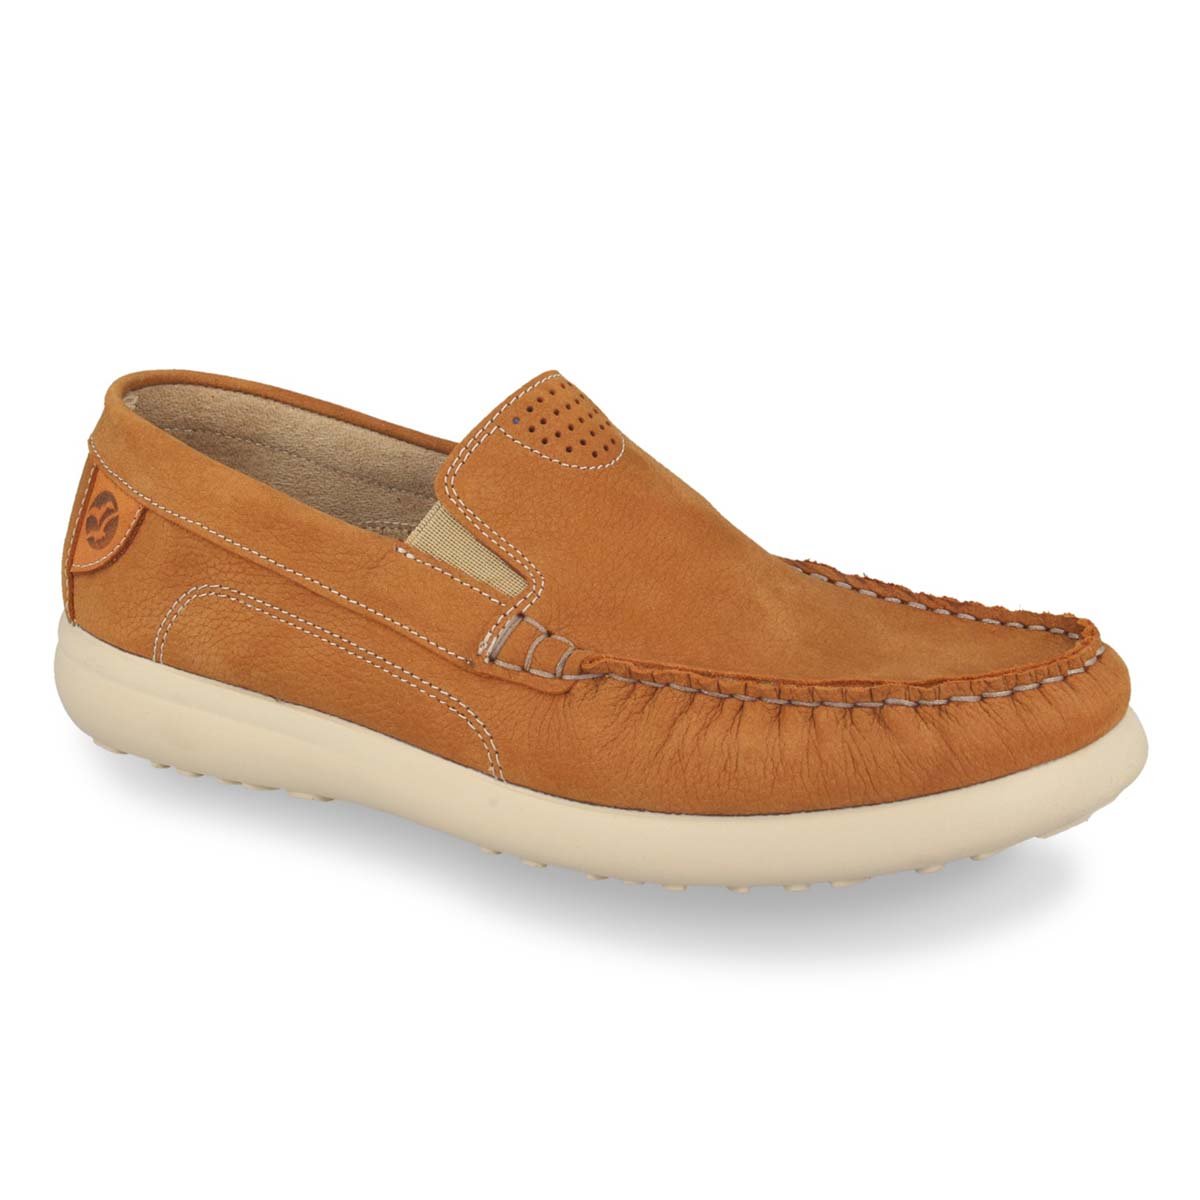 See the Leather Loafer Men Shoes in the colour BEIGE, available in various sizes